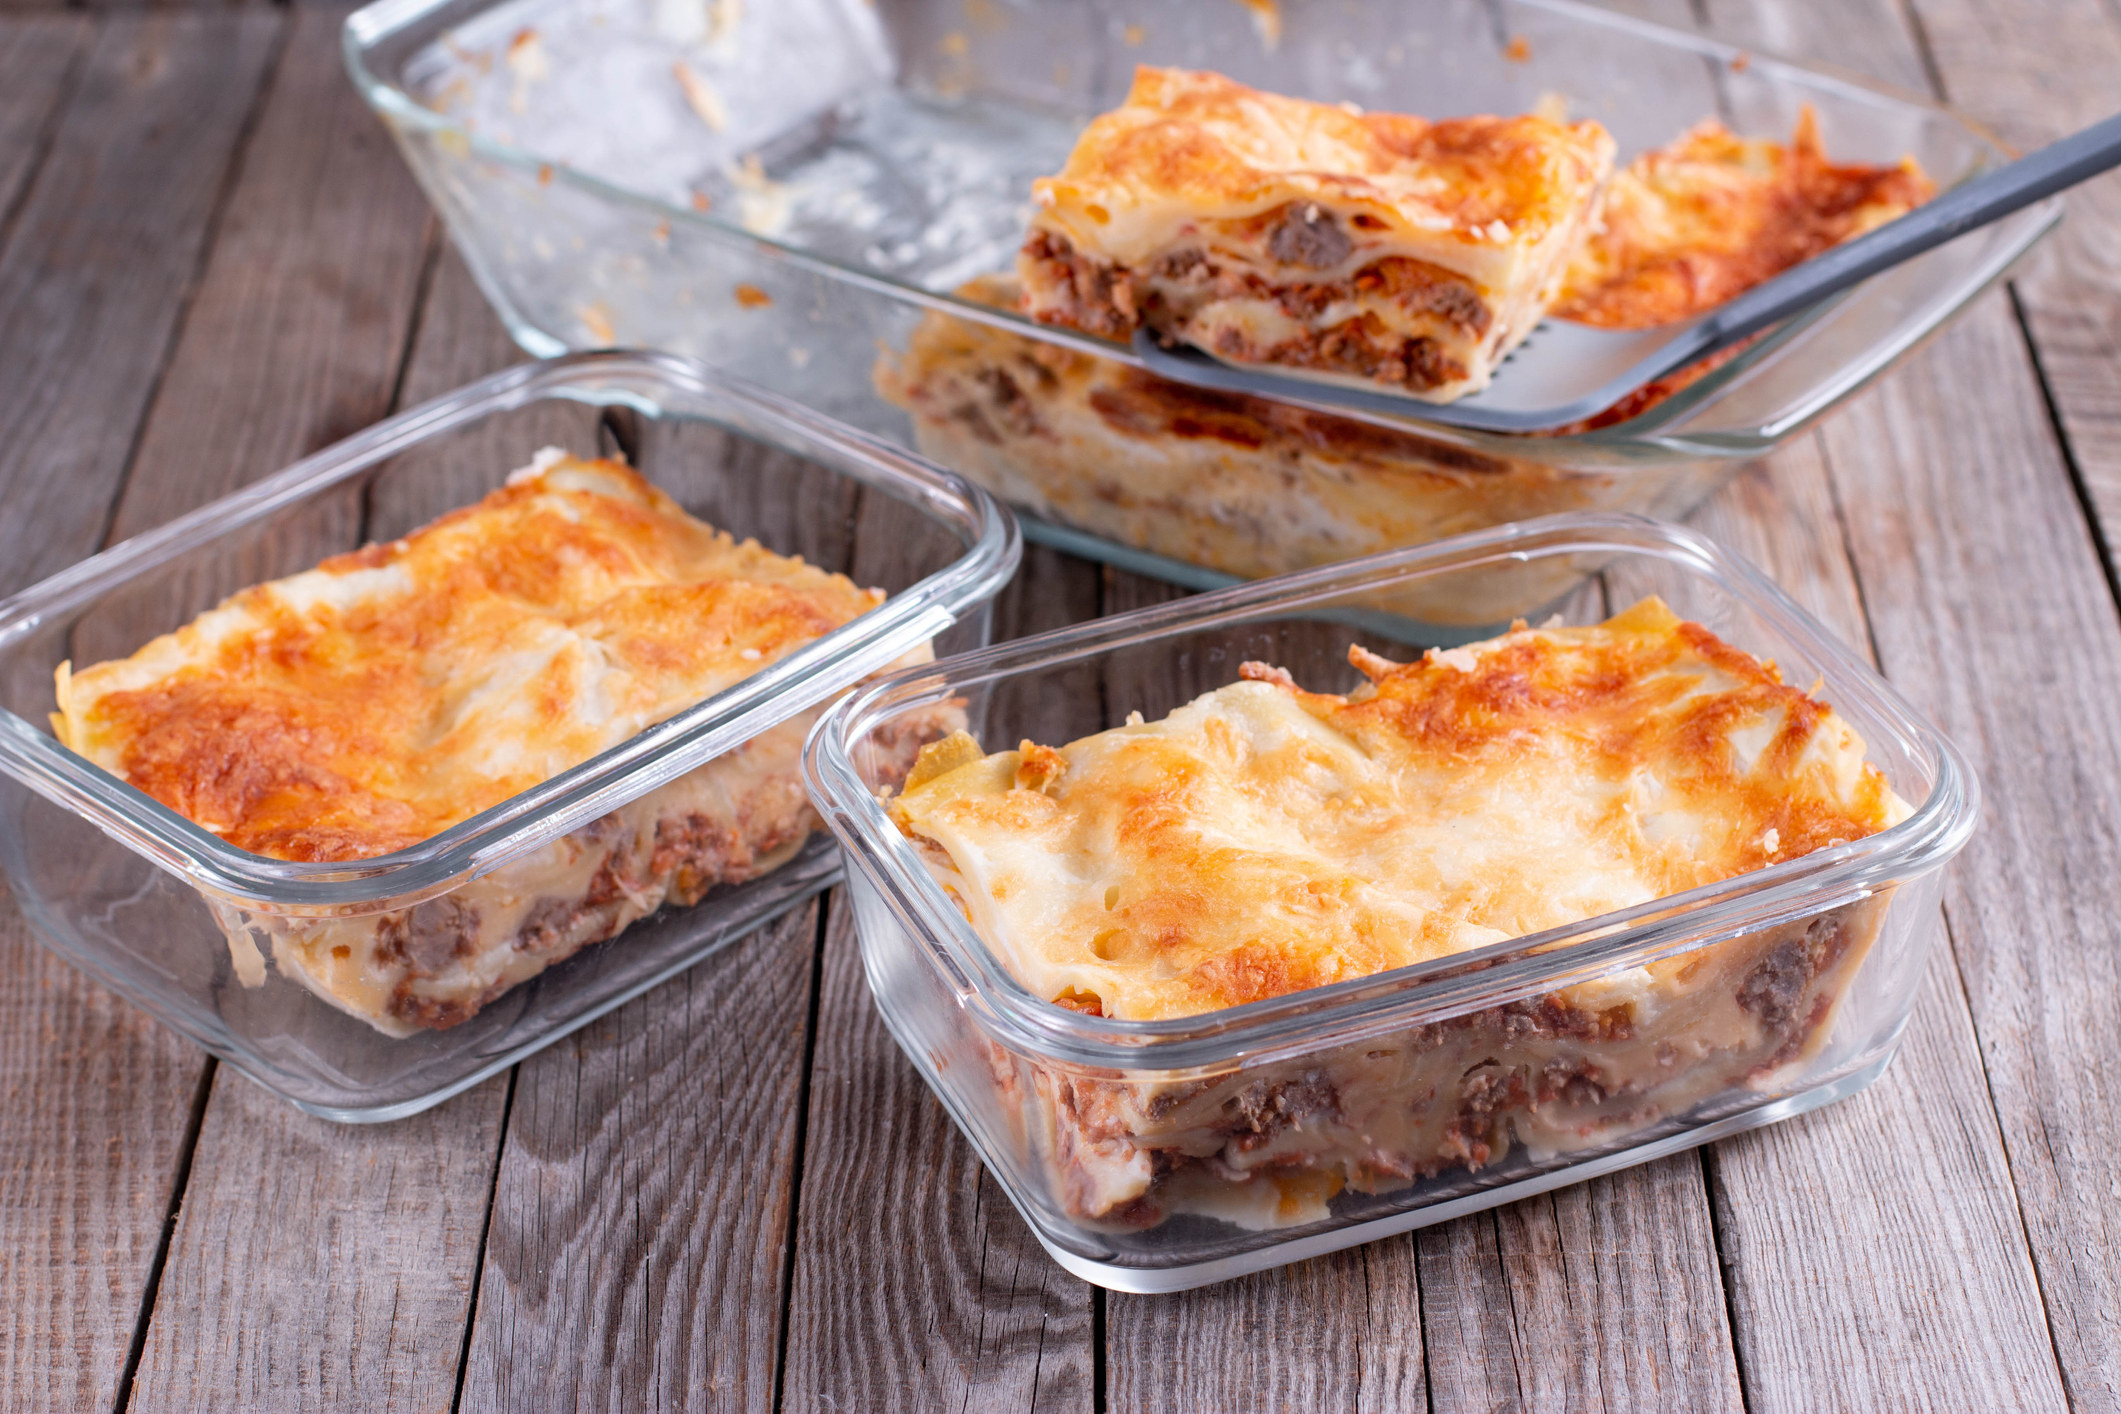 Frozen lasagne or casserole in glass containers.